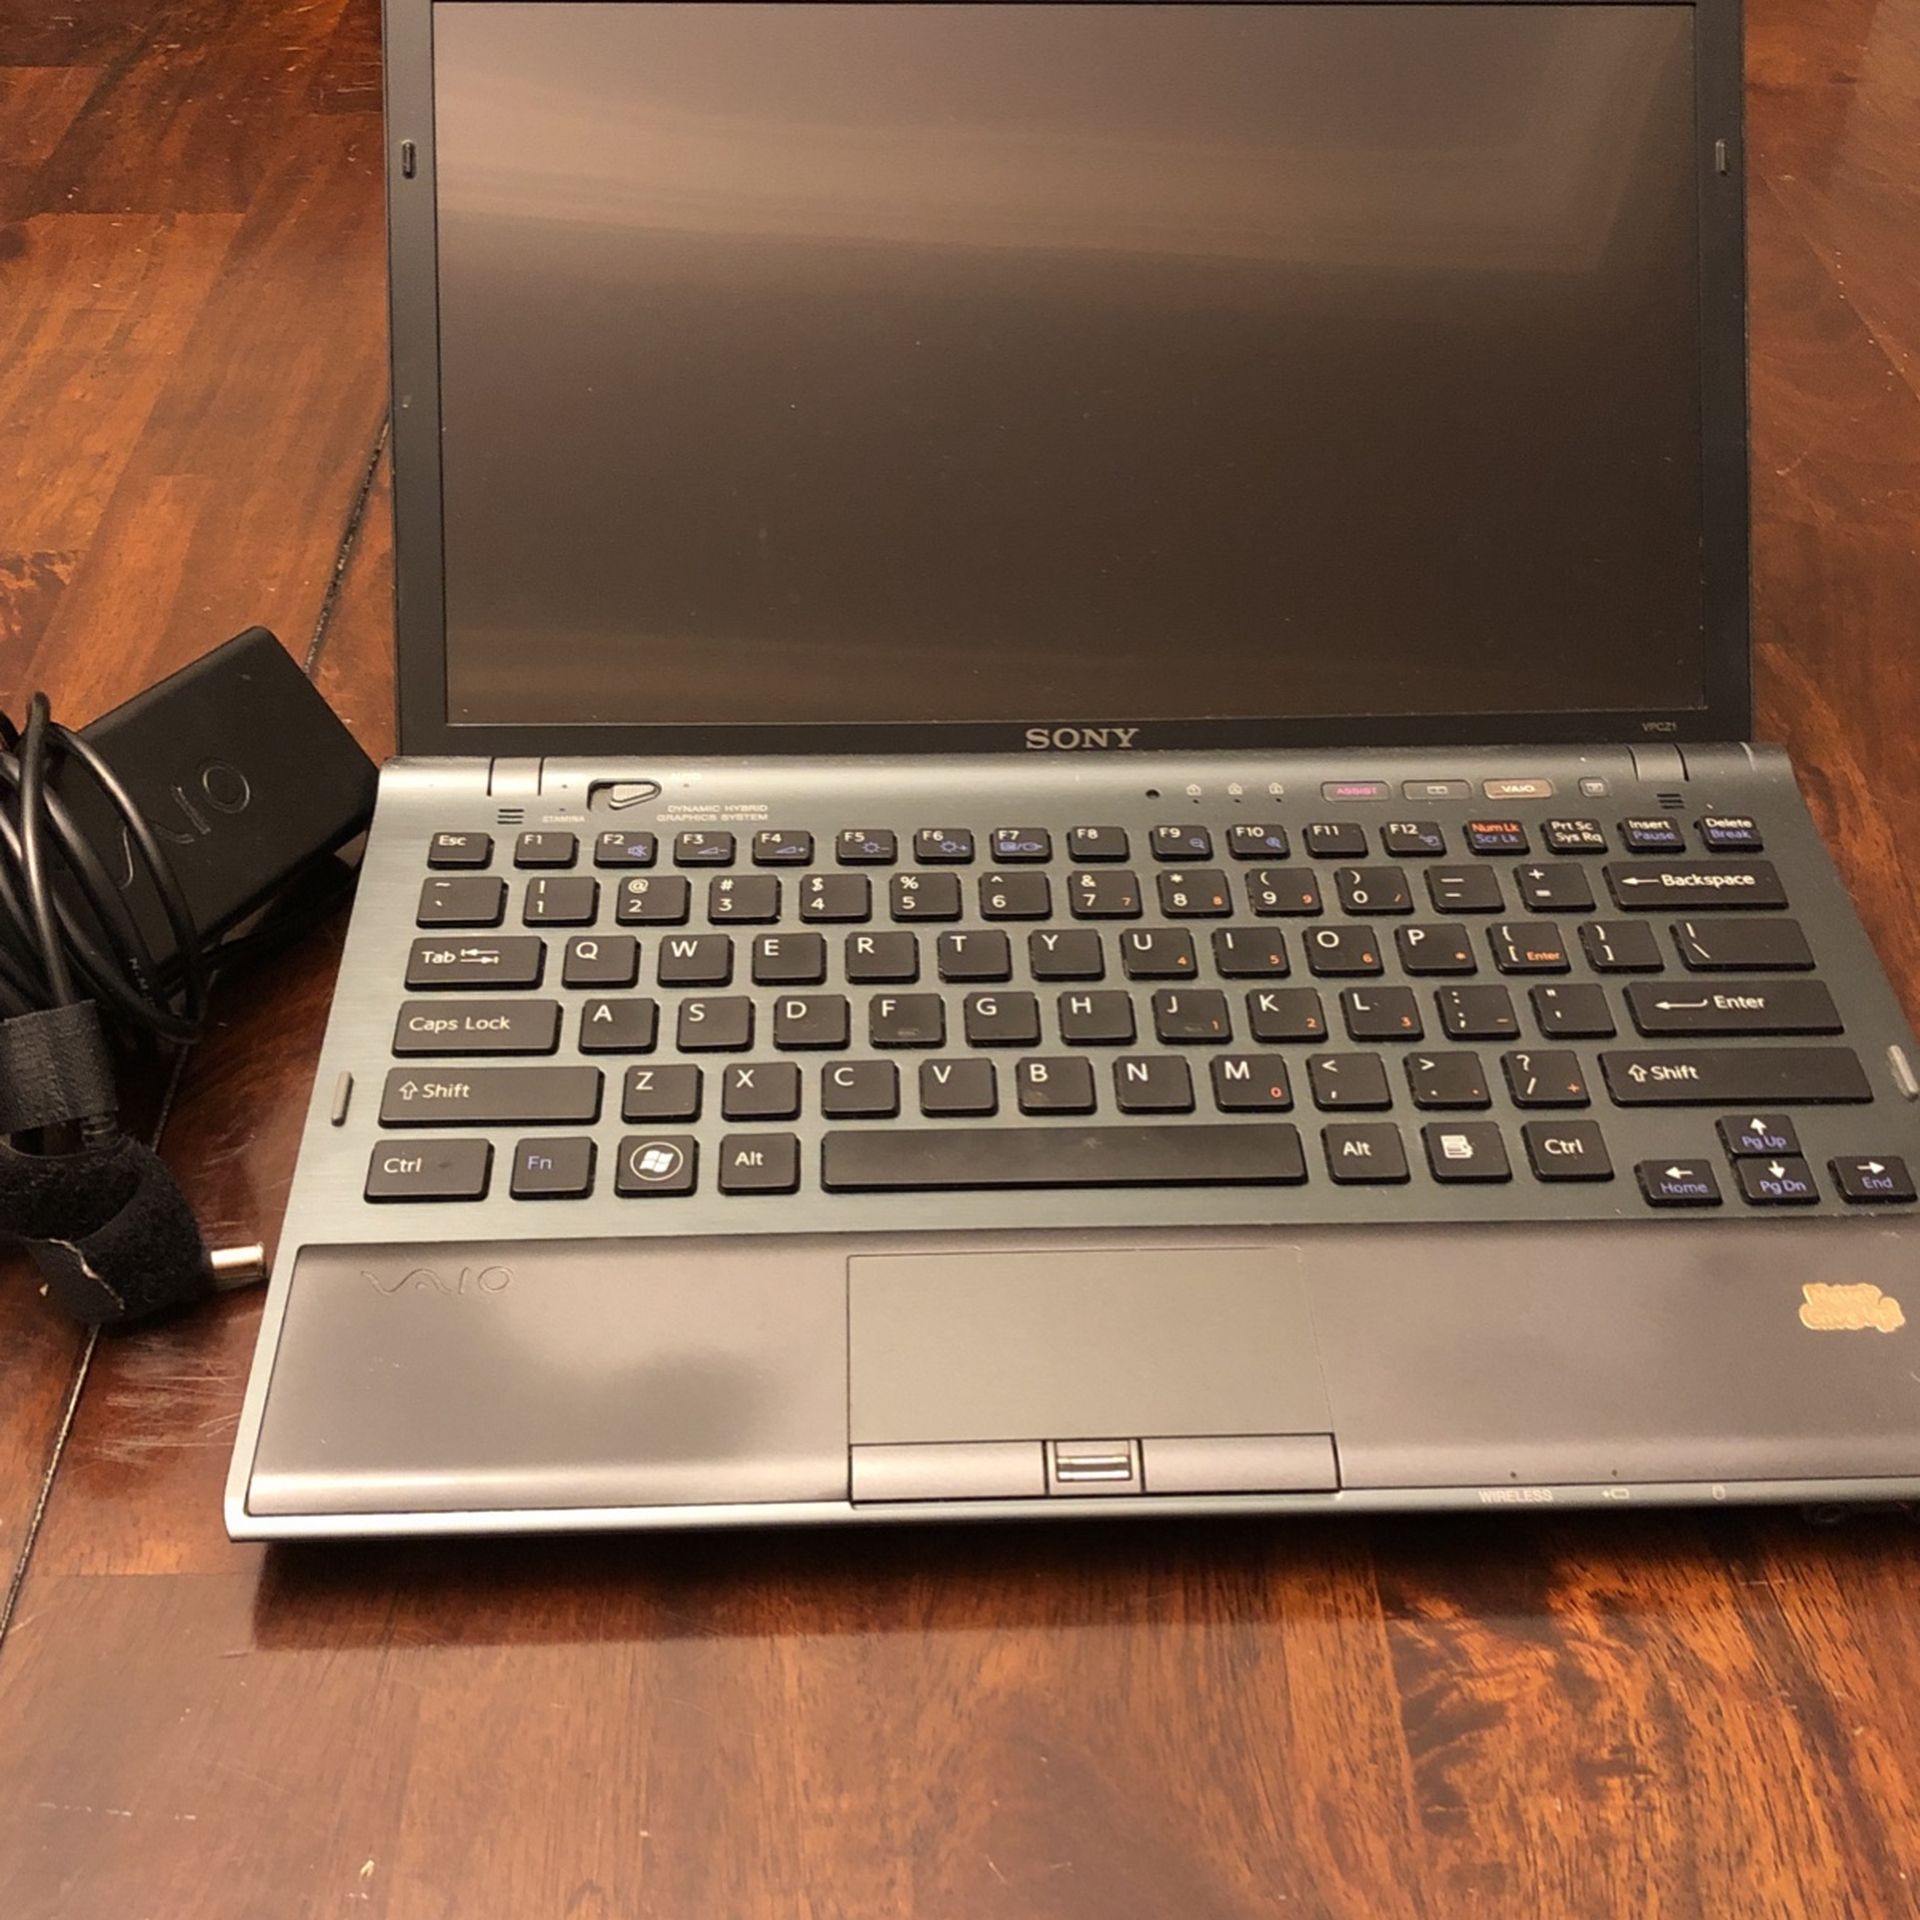 Sony Vaio Laptop Sell For Parts PCG3112T. With Power cord